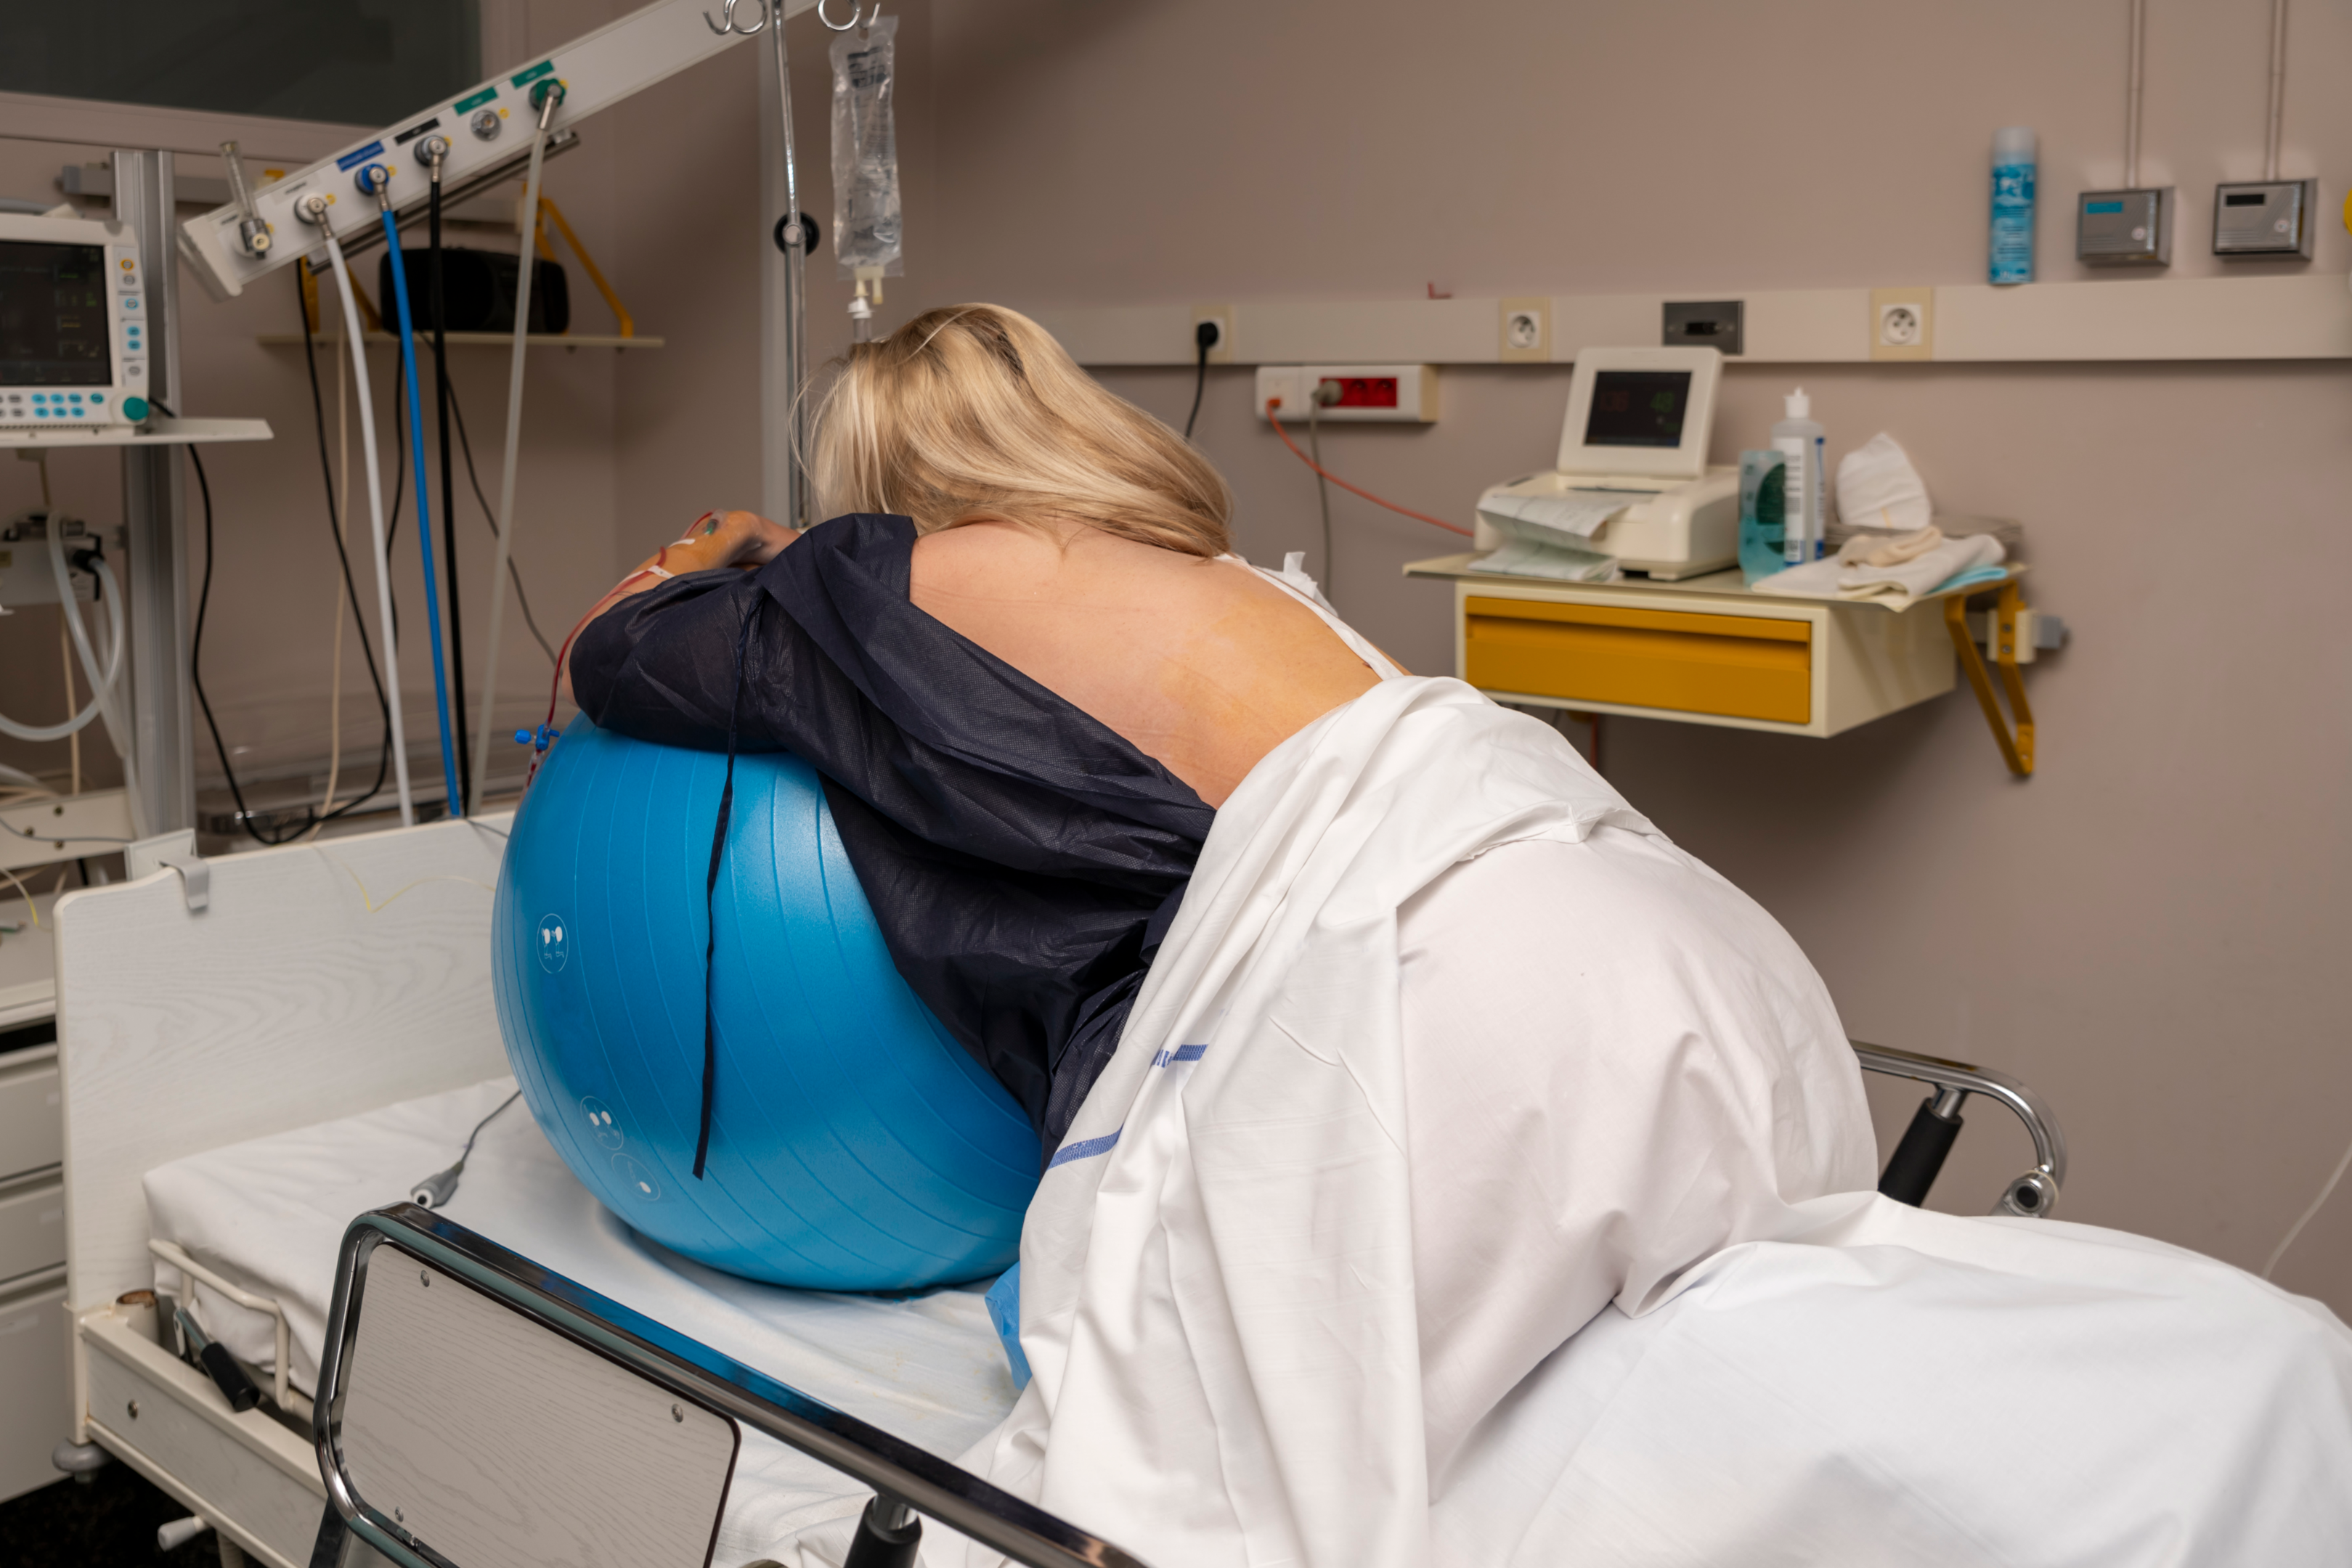 The birthing balls support you in a bend position during delivery.